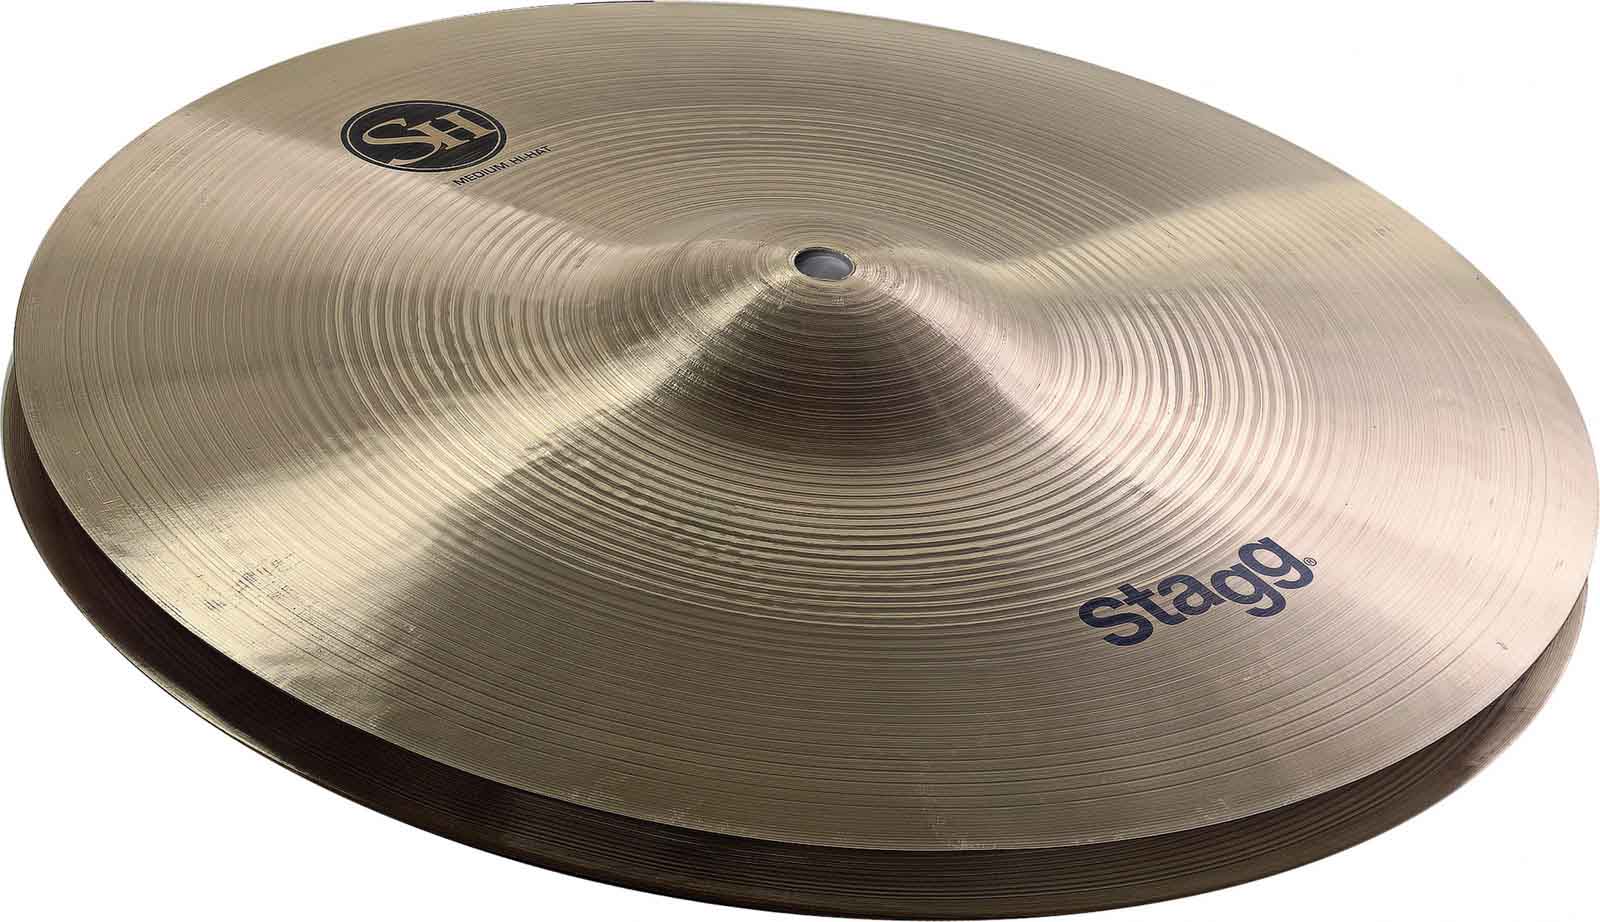 STAGG SH SERIES 13